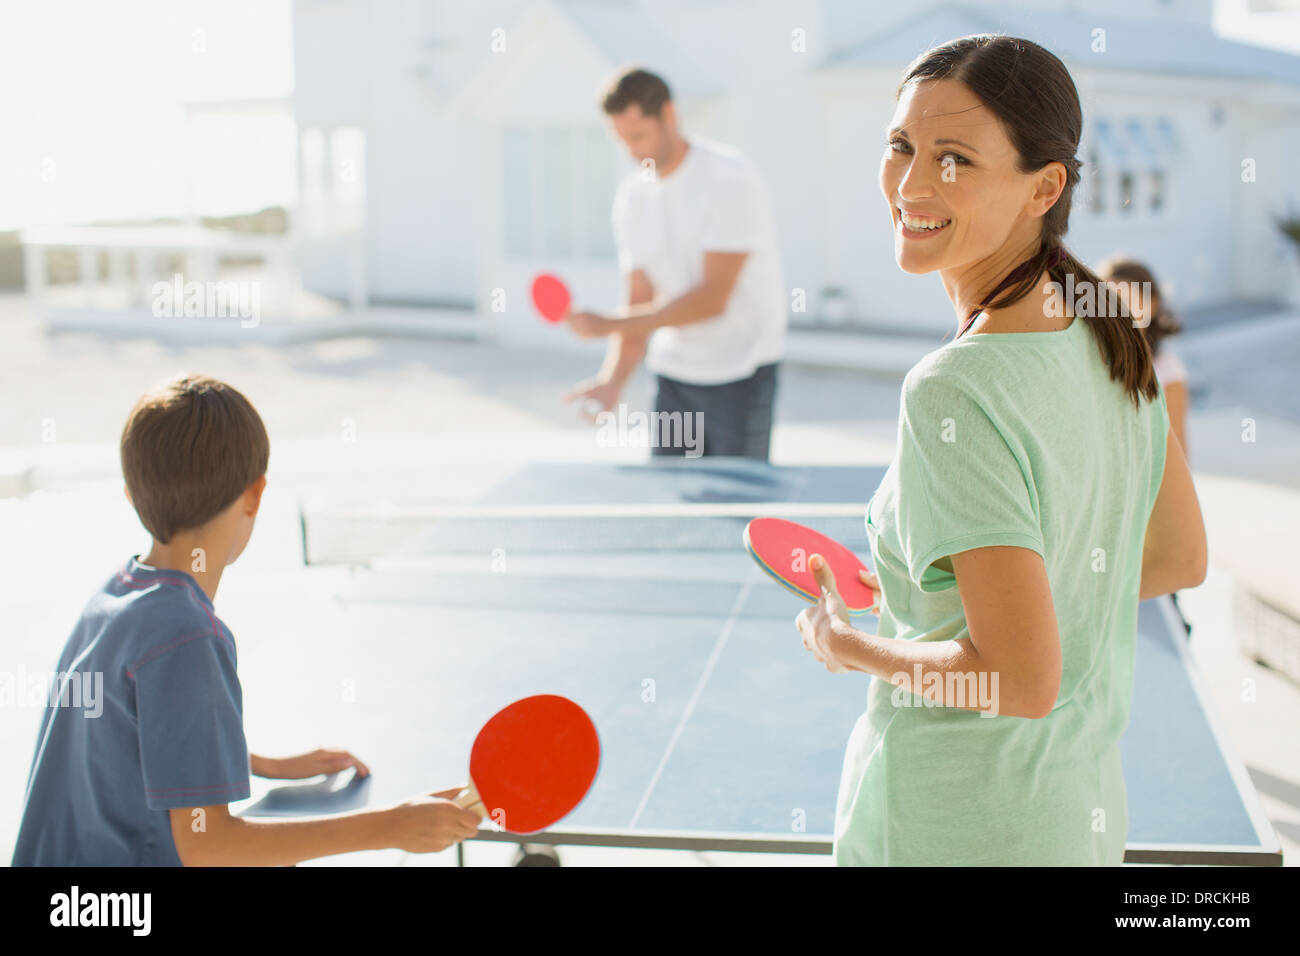 Family playing table tennis together outdoors Stock Photo